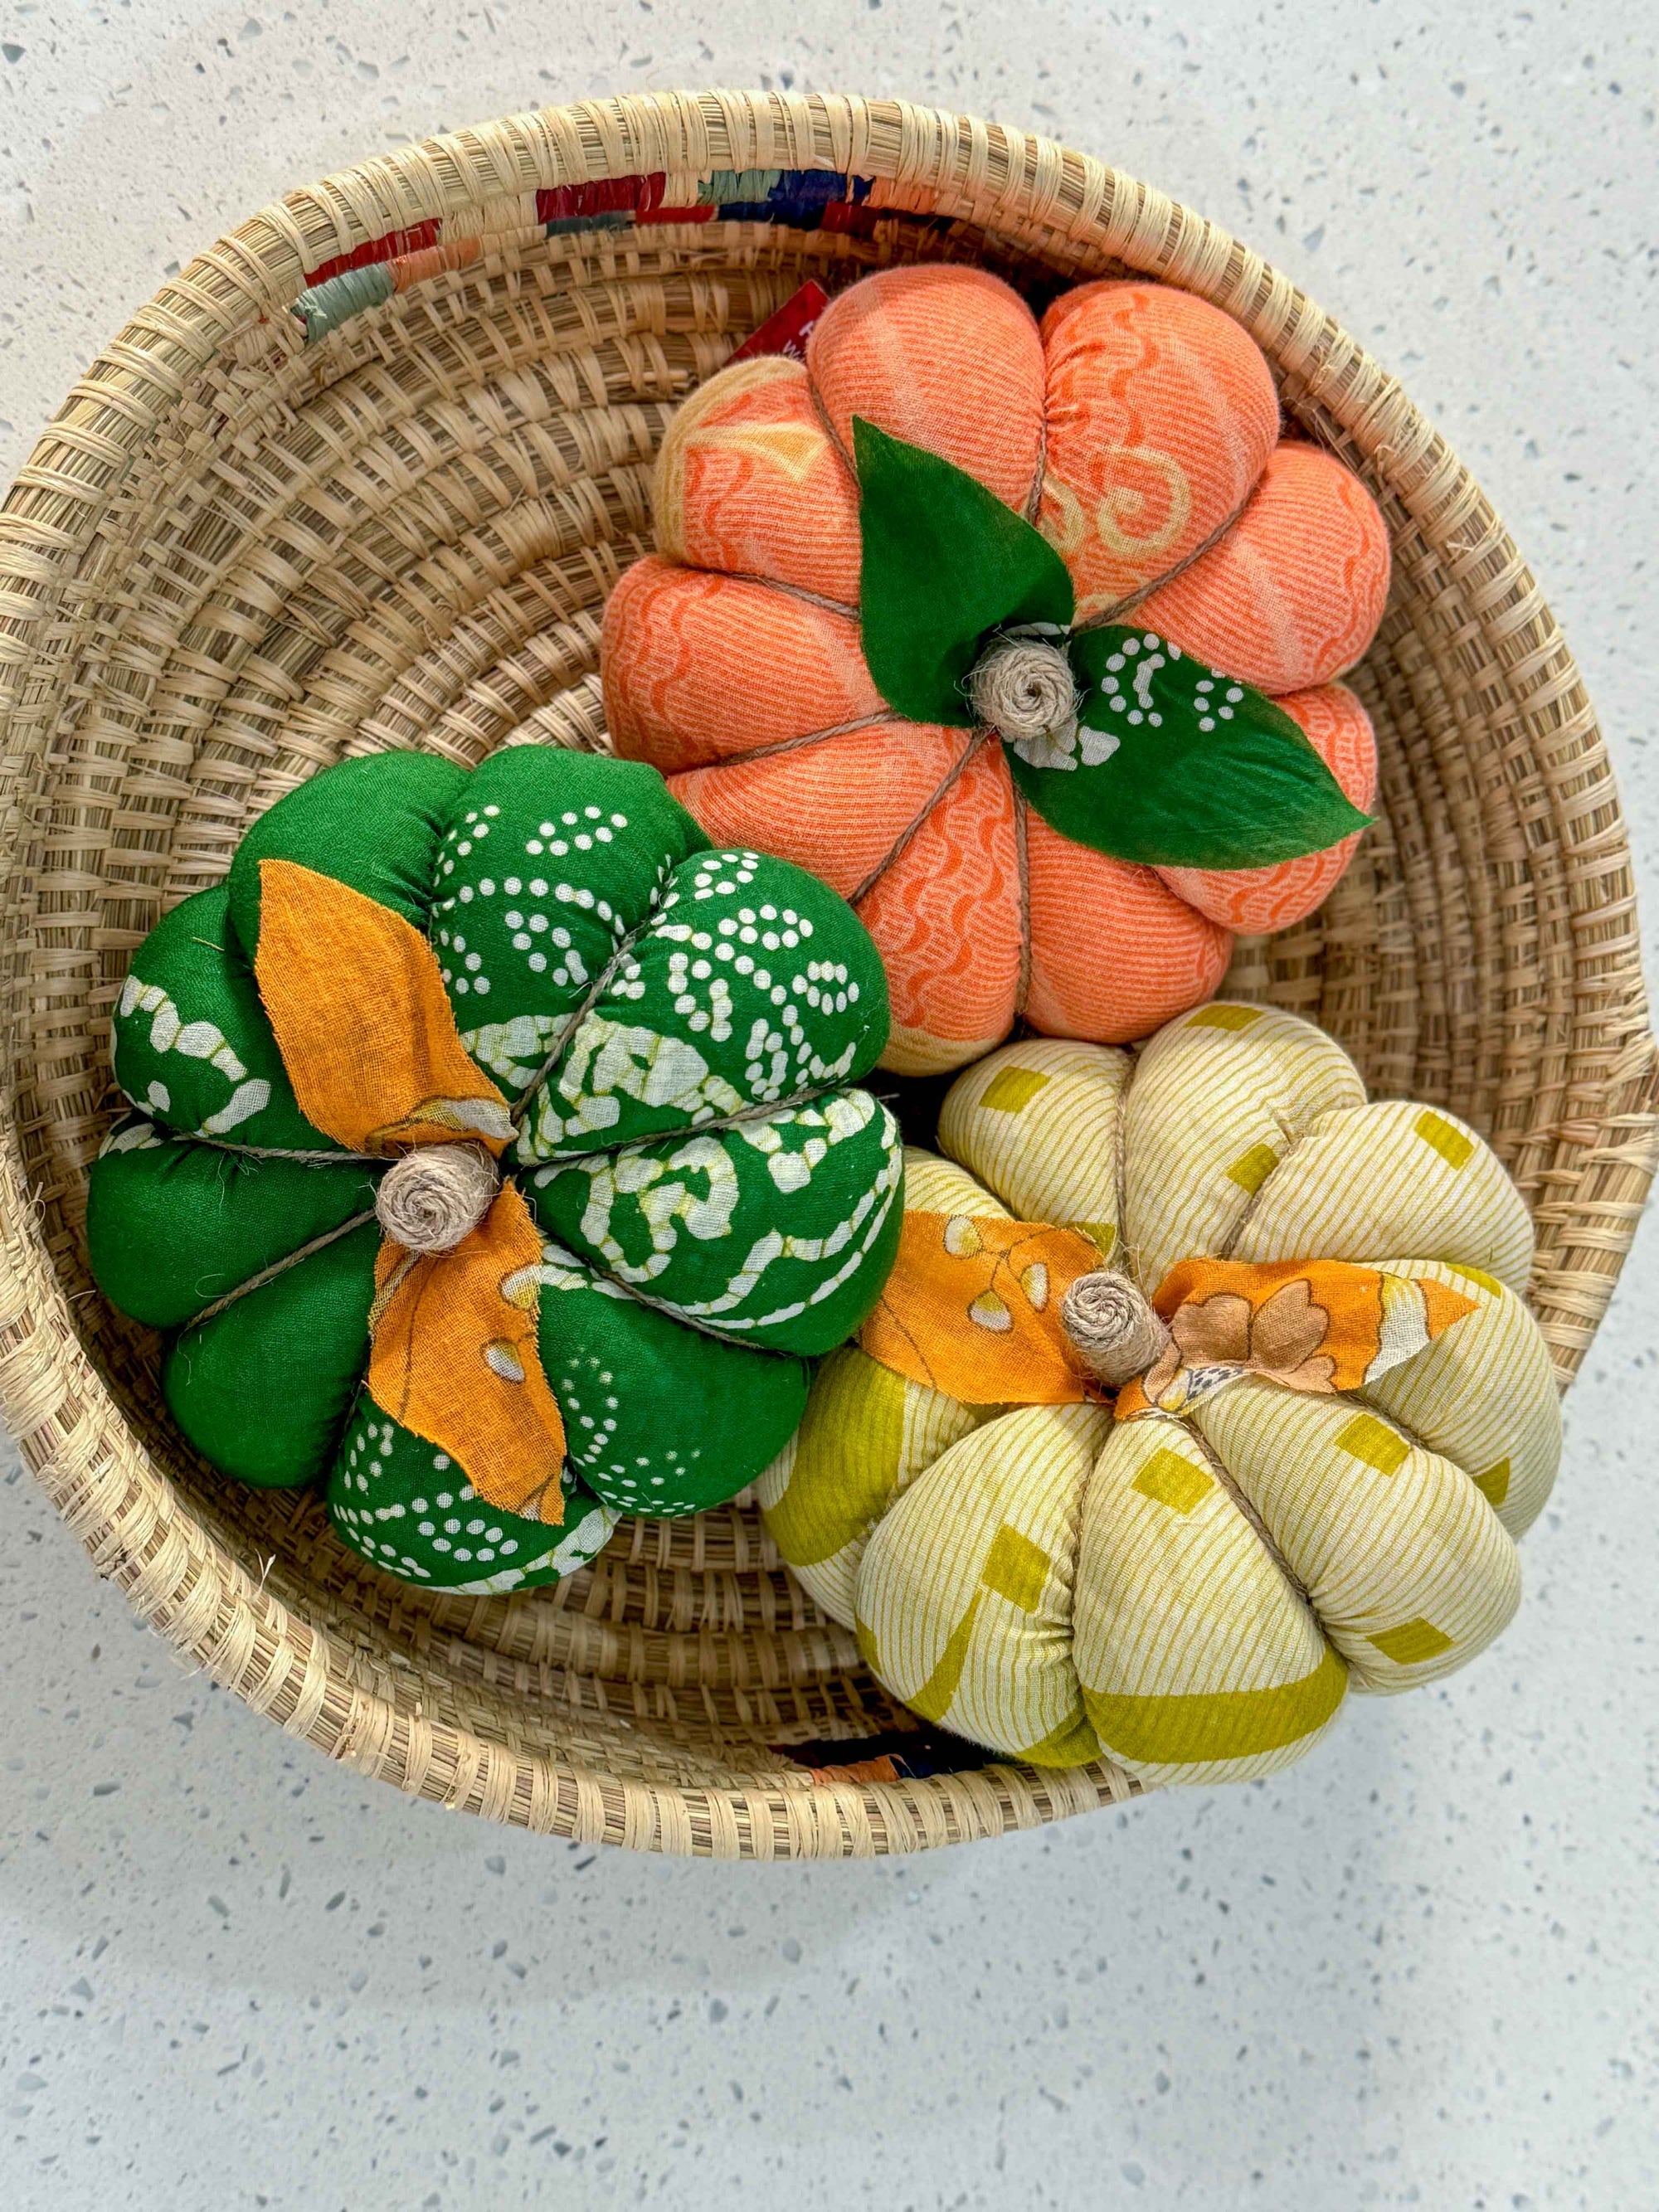 a basket filled with different types of decorative items